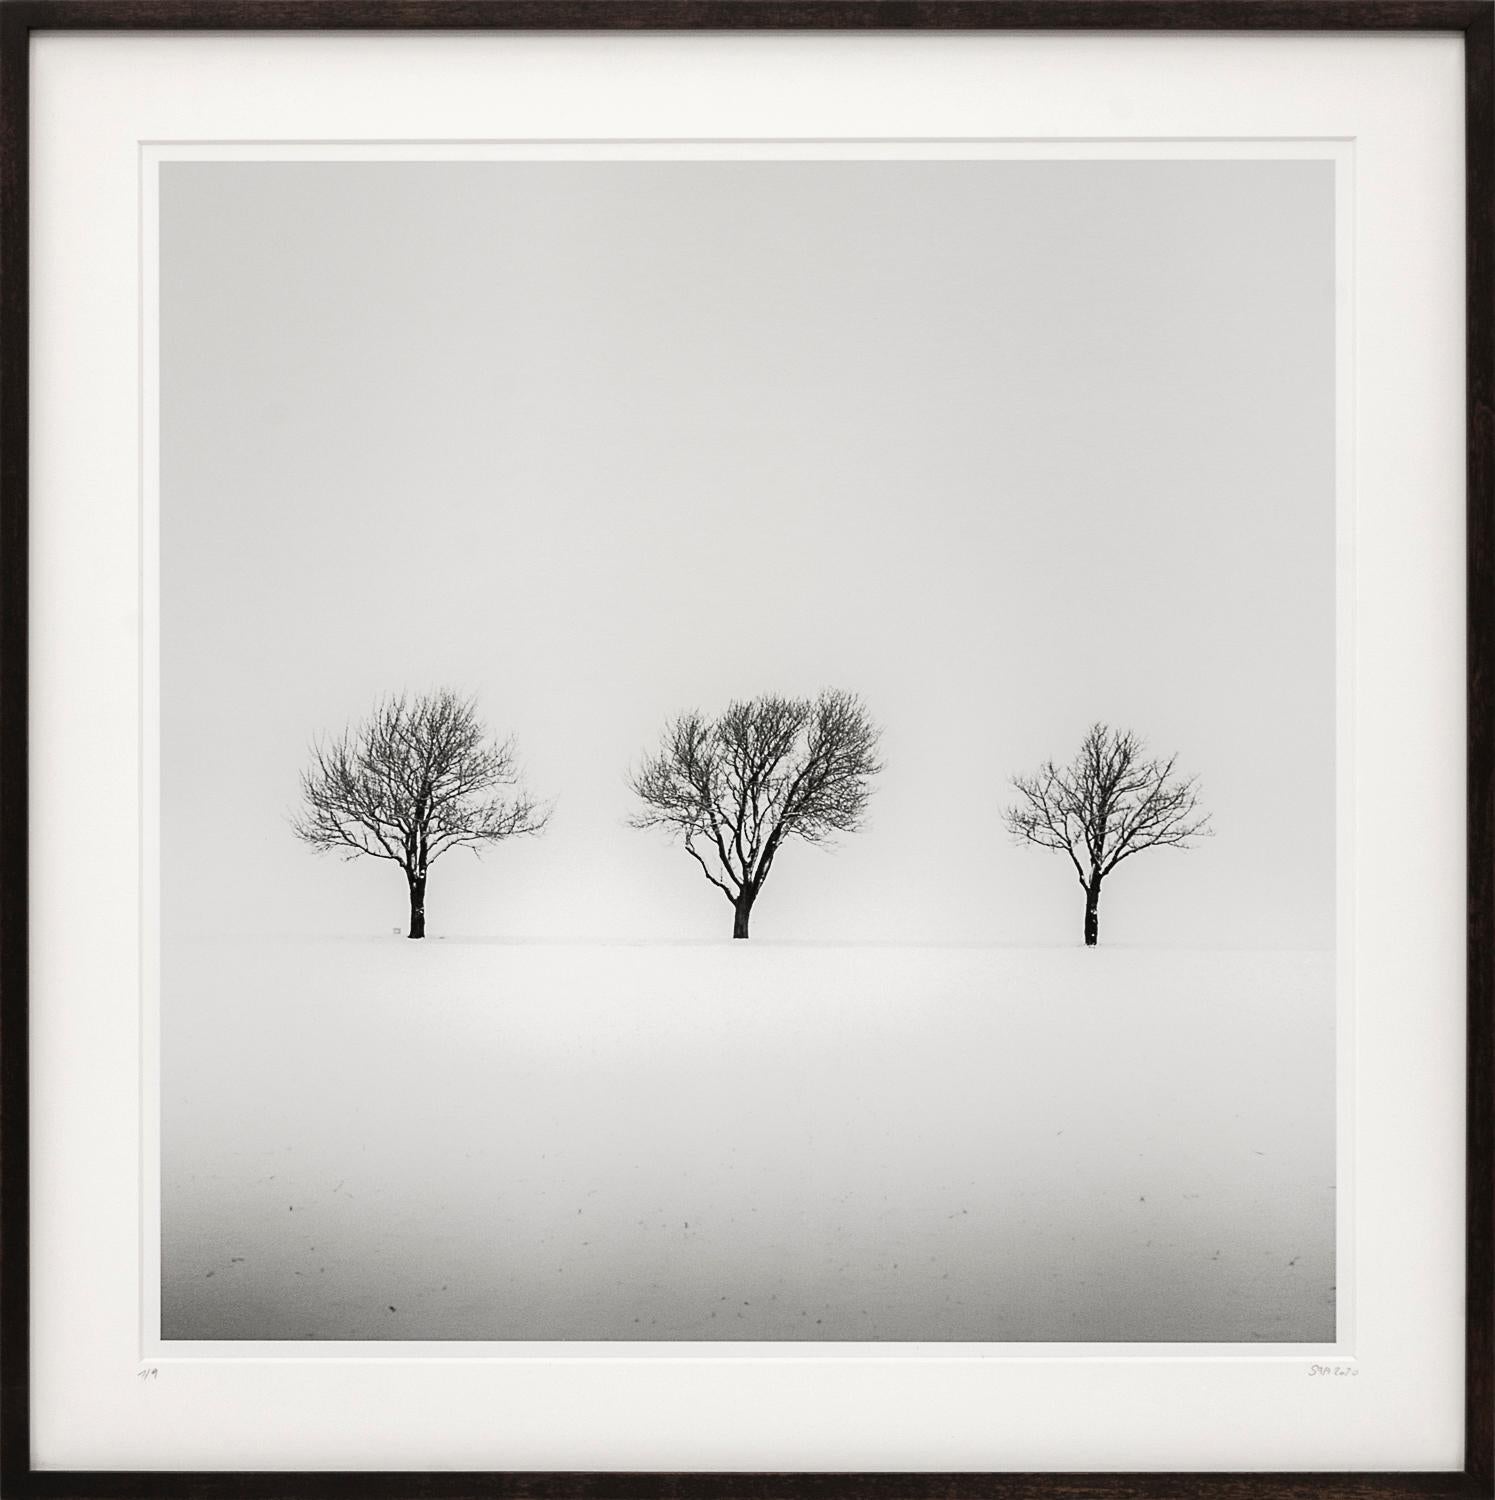 Trees in snowy Field, black and white gelatin silver fineart photography, framed